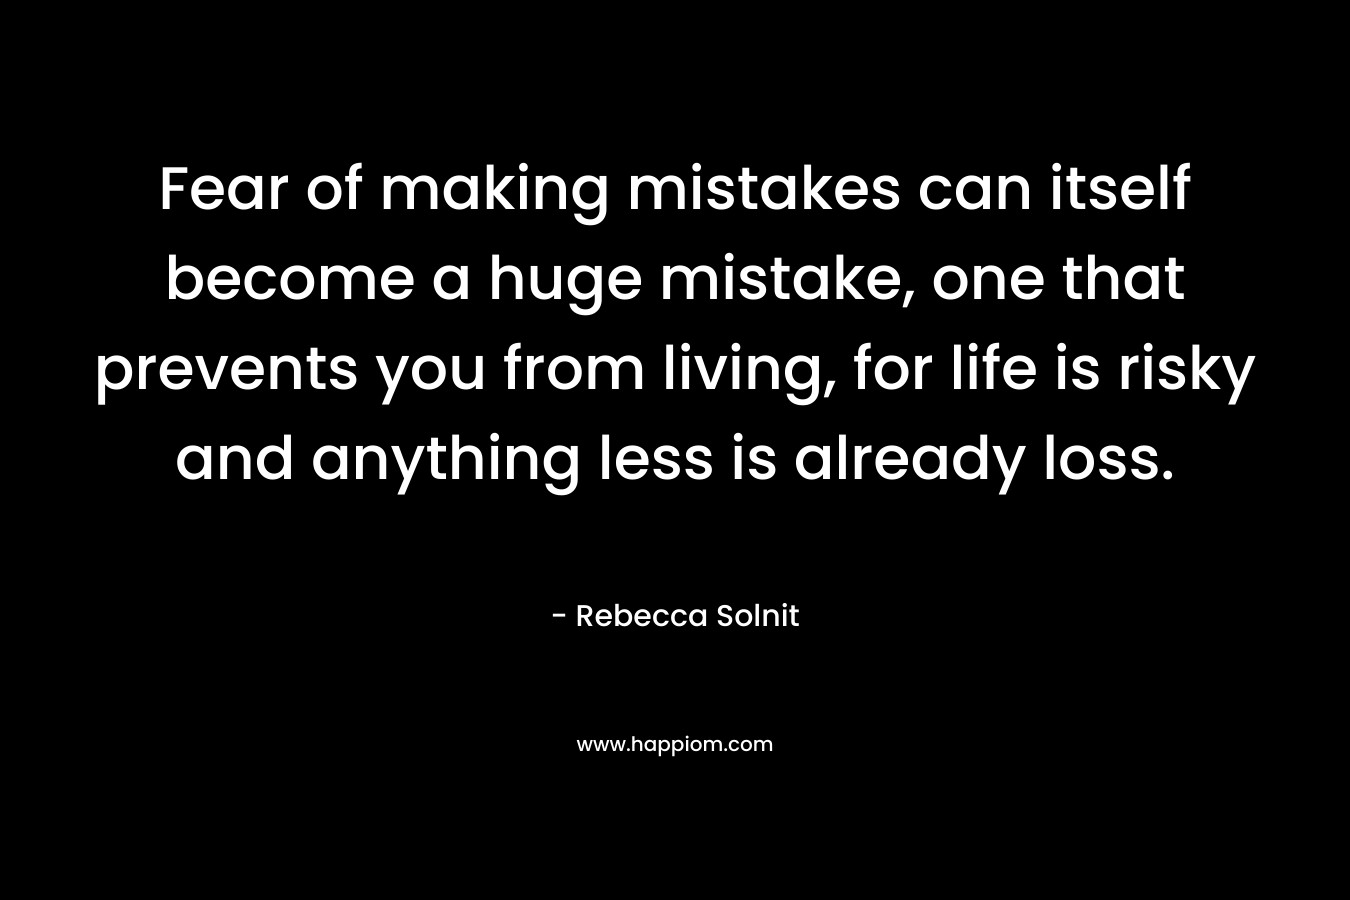 Fear of making mistakes can itself become a huge mistake, one that prevents you from living, for life is risky and anything less is already loss. – Rebecca Solnit